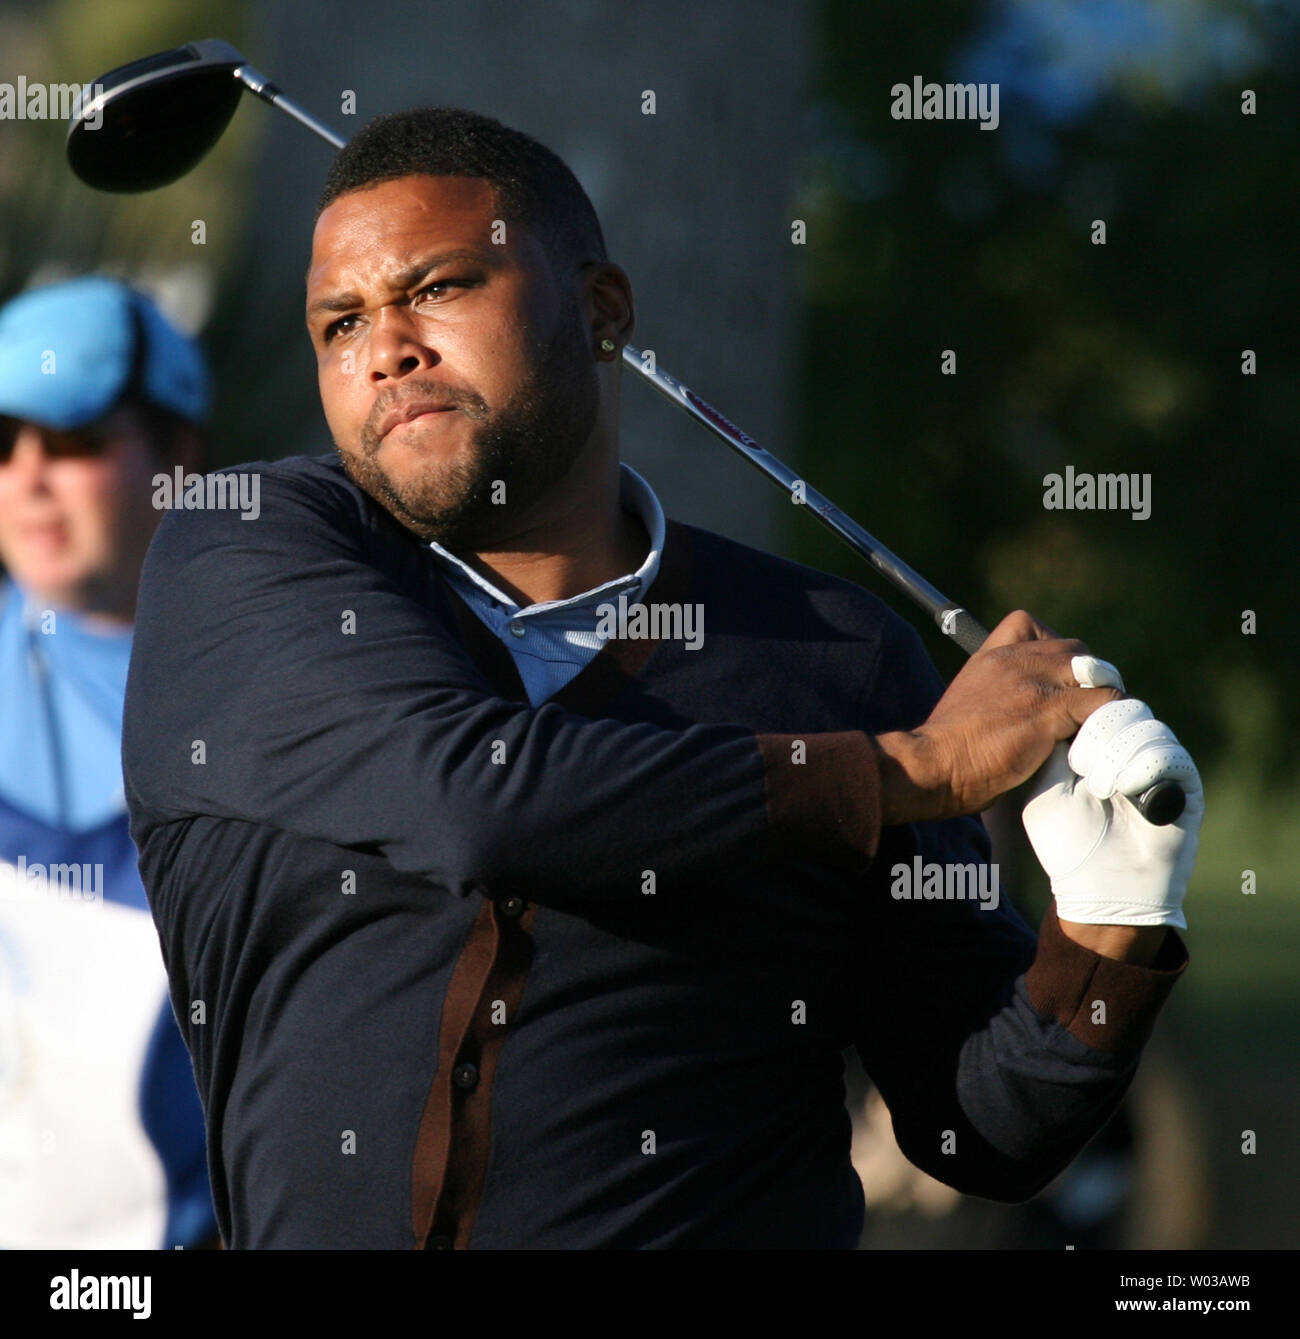 Actor Anthony Anderson watches his tee shot during the first round of play of the Bob Hope Chrysler Classic at Bermuda Dunes Country Club in Bermuda Dunes, California on January 17, 2007.   (UPI Photo/Art Foxall) Stock Photo